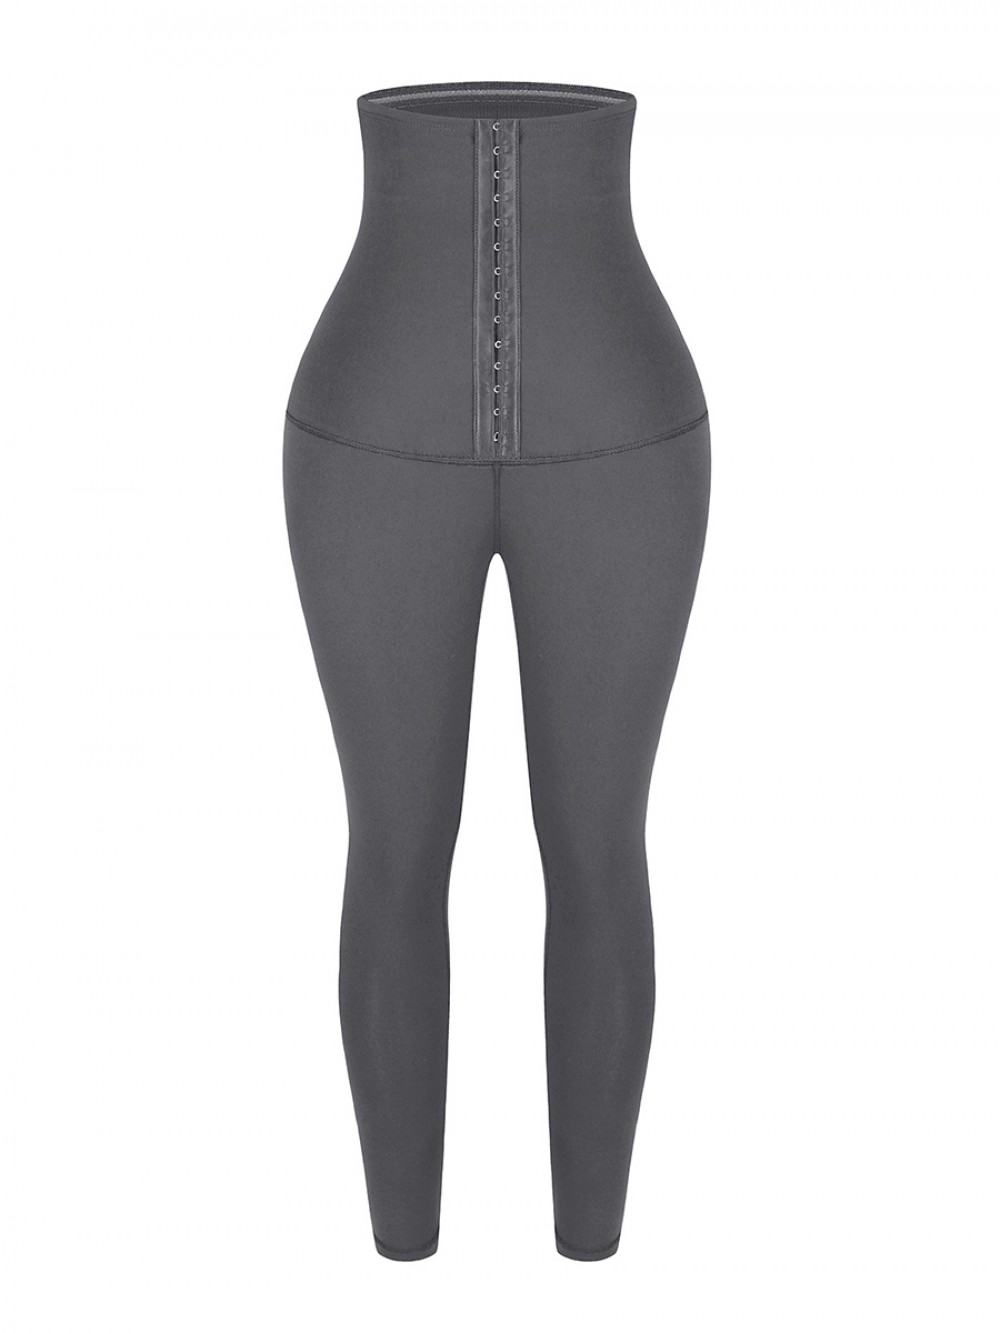 Gray High Waist Shapewear Leggings Ankle Length Lose Weight